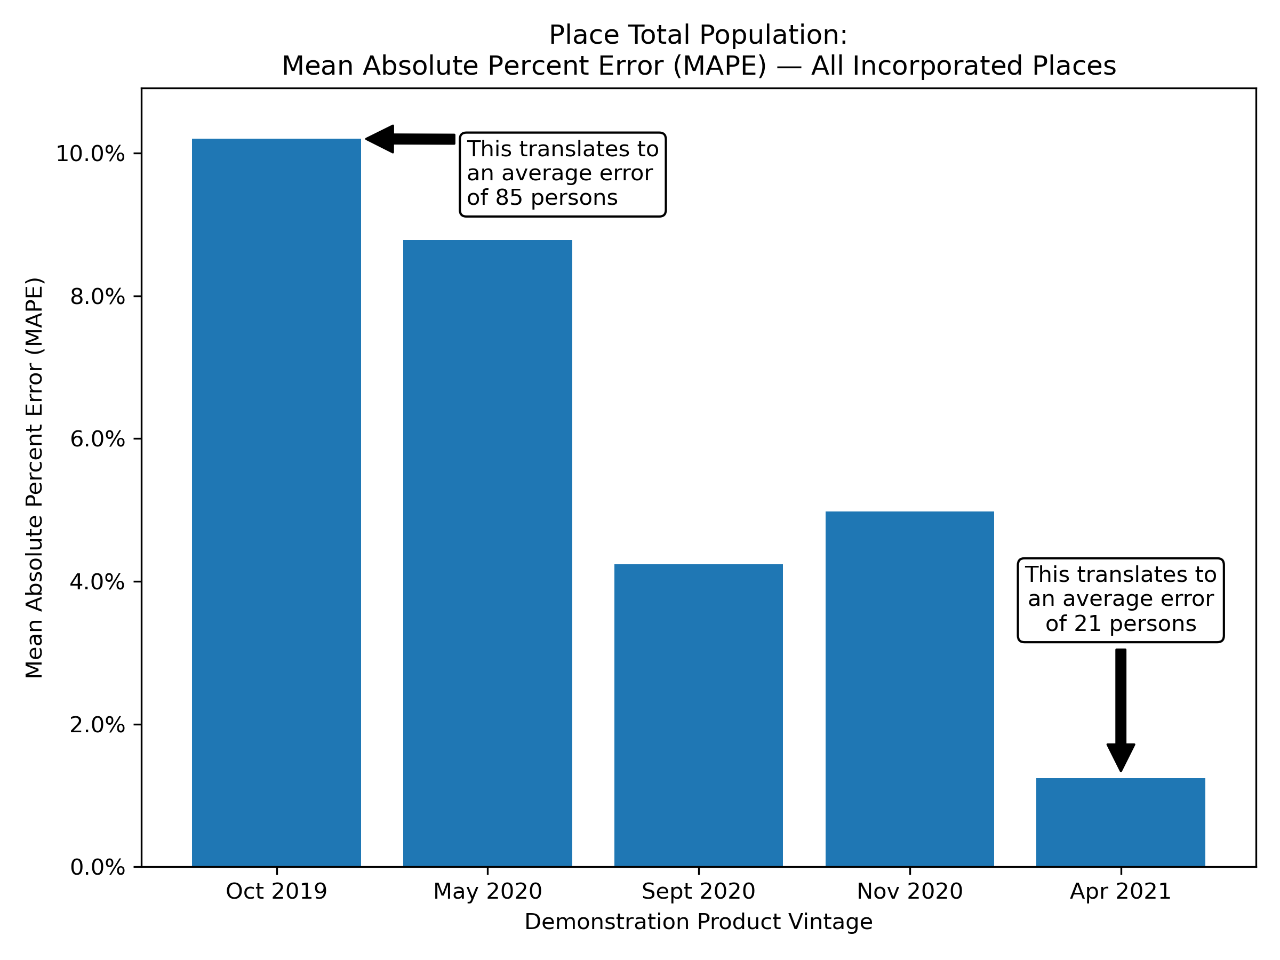 Total Population: All Incorporated Places